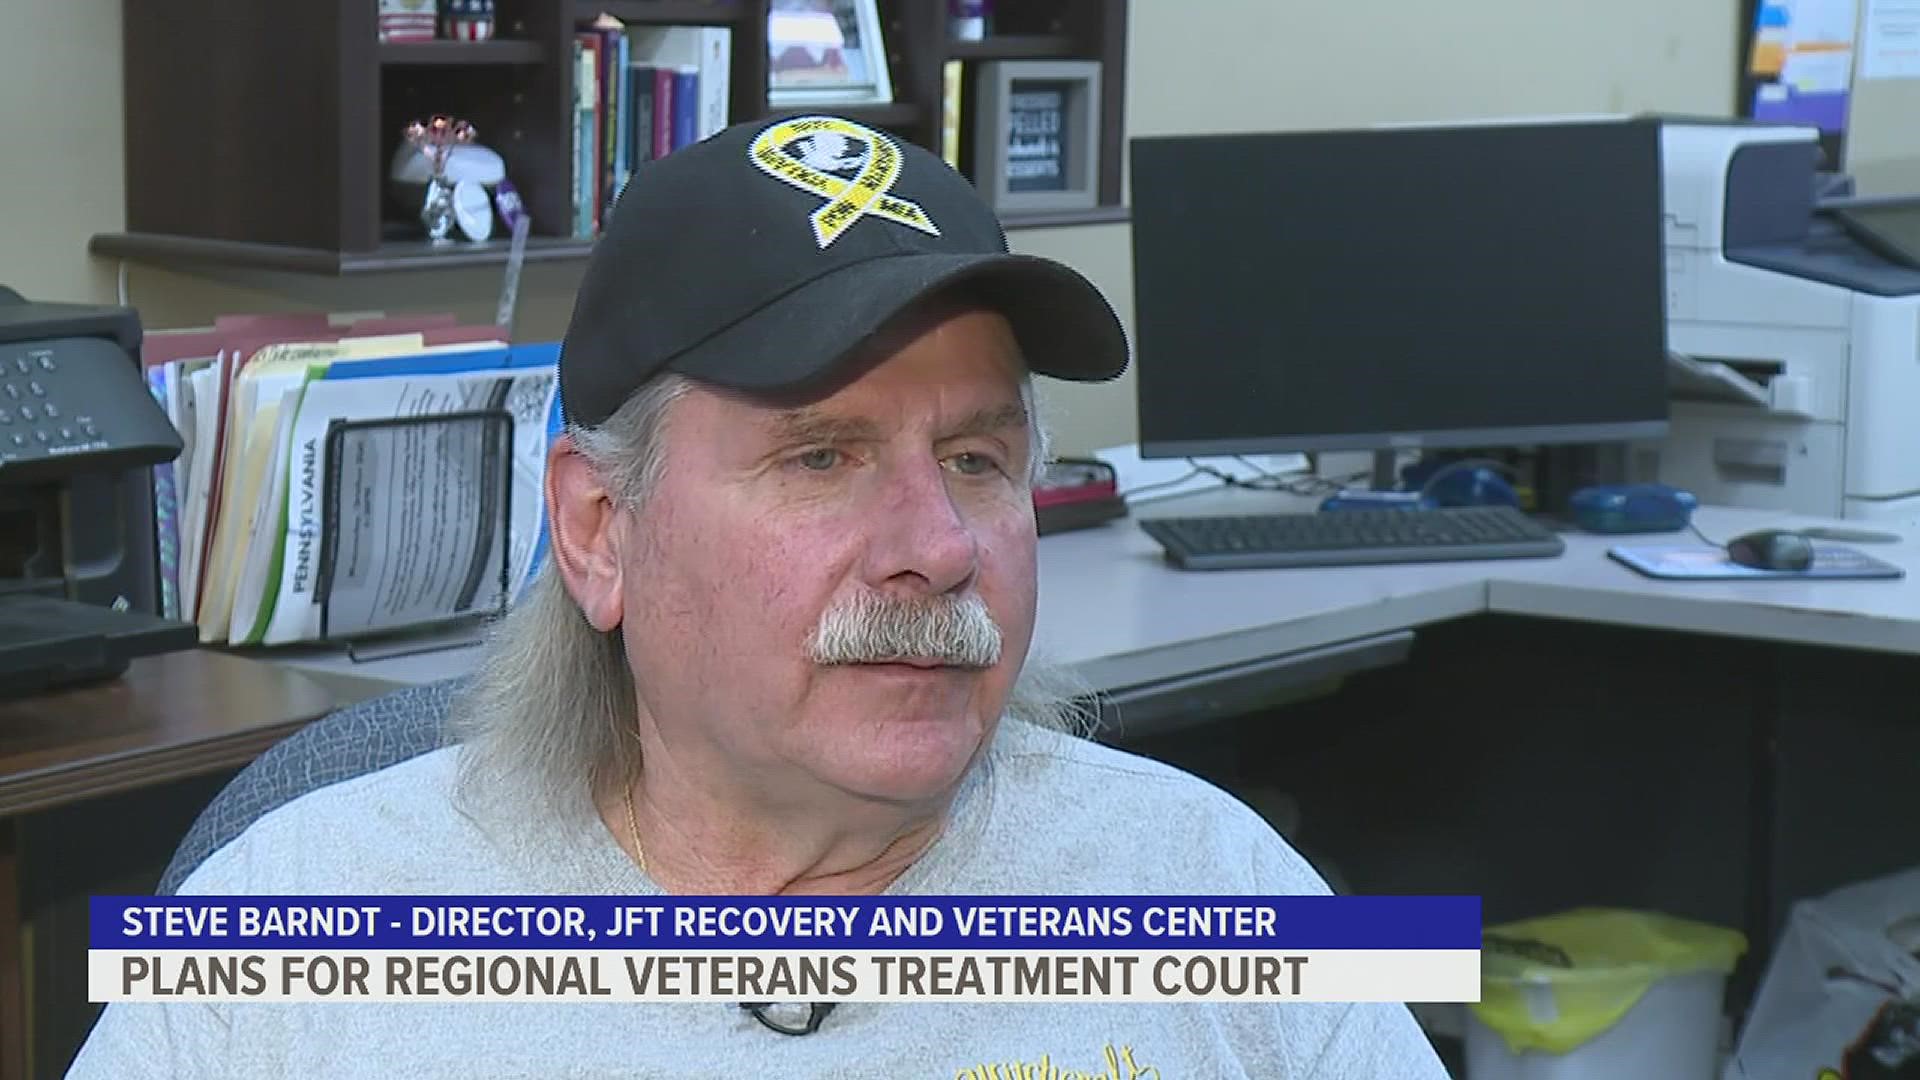 A NEW EFFORT BY THE PENNSYLVANIA COURTS TRIES TO HELP VETERANS SUFFERING FROM MENTAL ILLNESS AND SUBSTANCE USE.